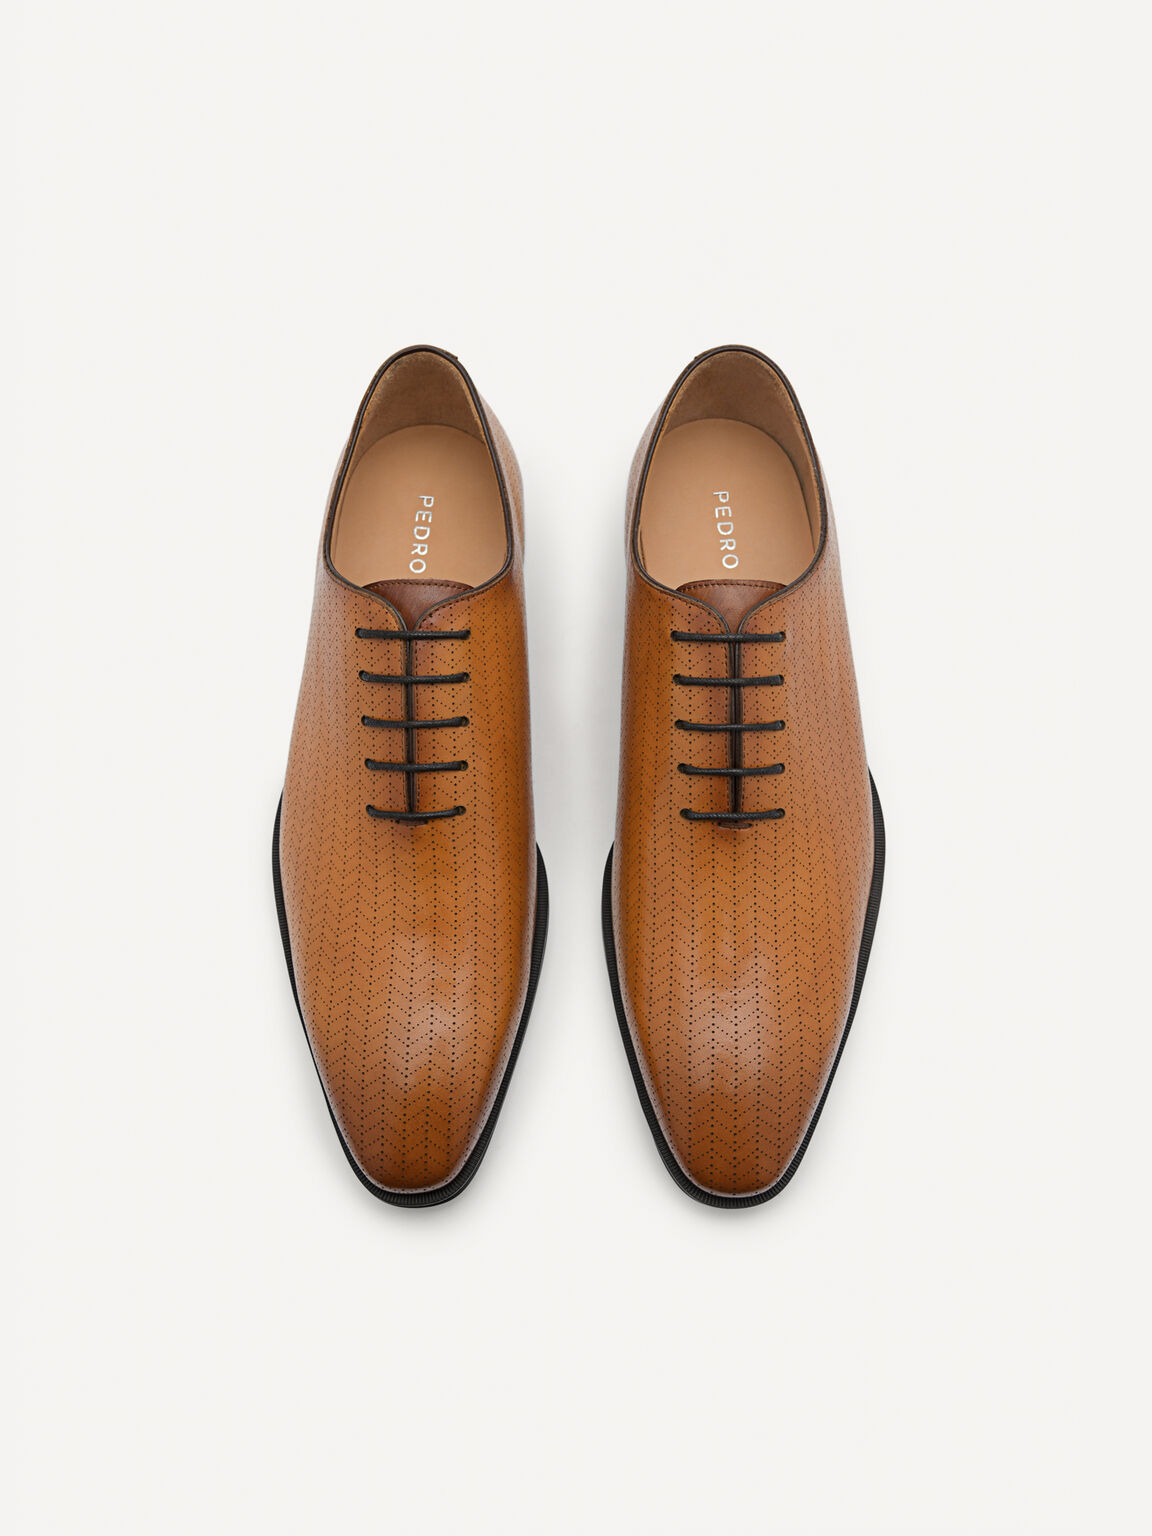 Leather Oxford Shoes, Camel